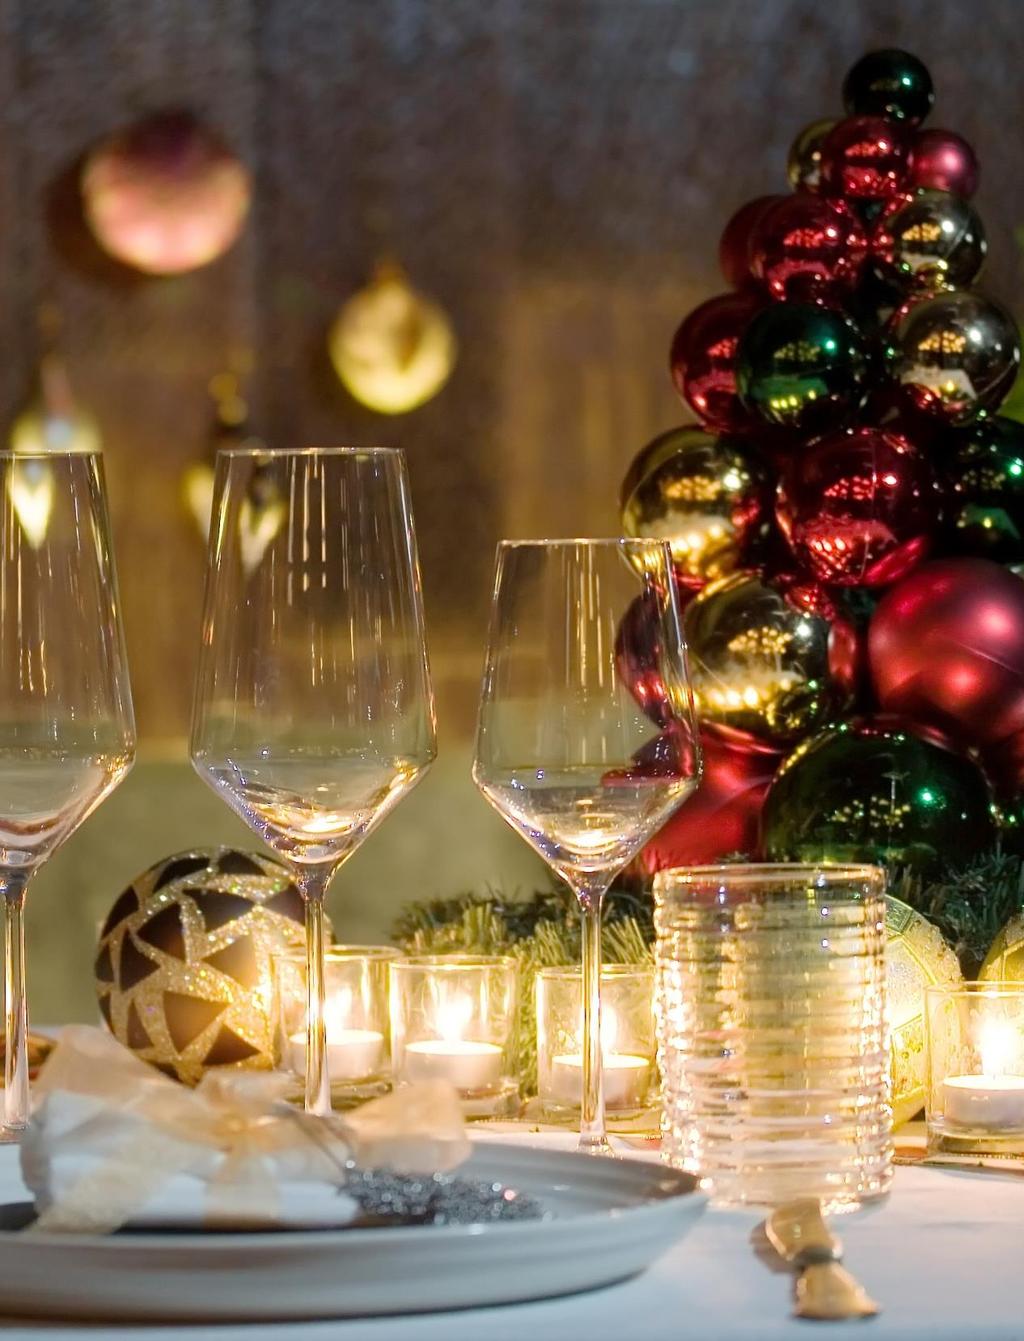 CHRISTMAS EVE DEGUSTAZIONE AT IL RISTORANTE - NIKO ROMITO 24 December 2017 A decadent explosion of Italian flavours awaits you with this special set menu tailor-made by the Three-Michelin Starred